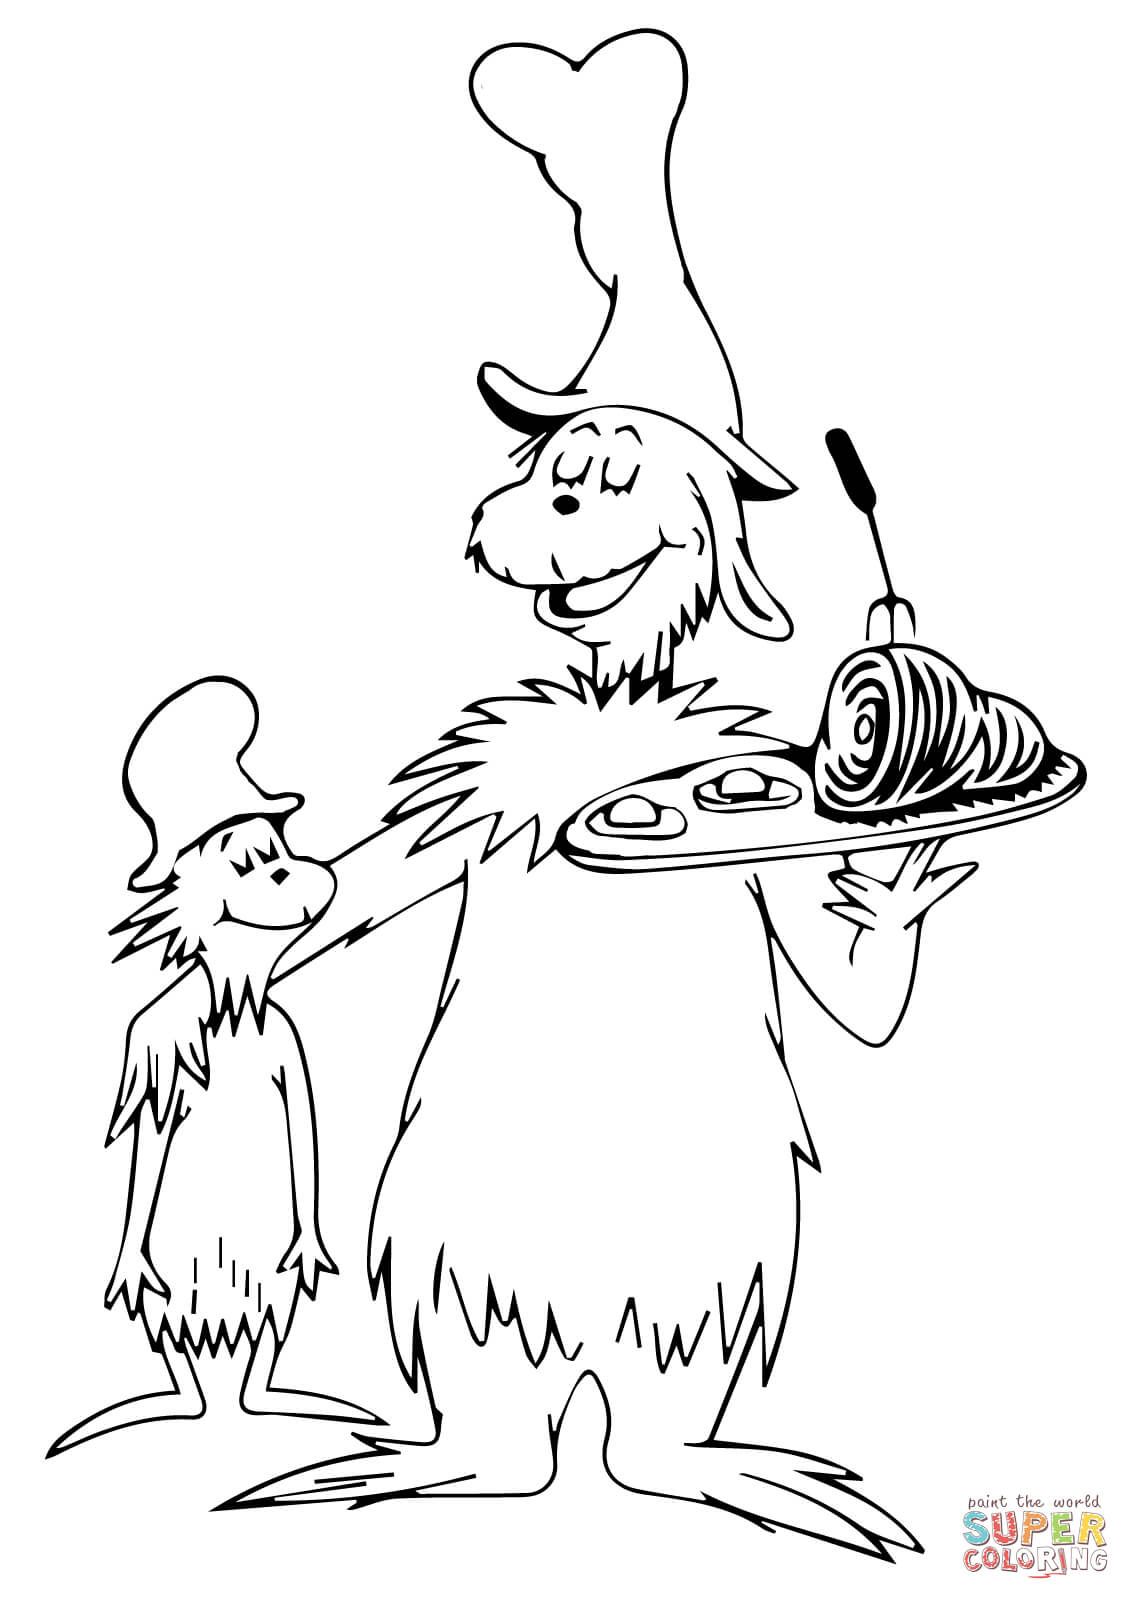 green eggs and ham coloring pages green eggs and ham coloring pages various episodes k5 green pages ham coloring eggs and